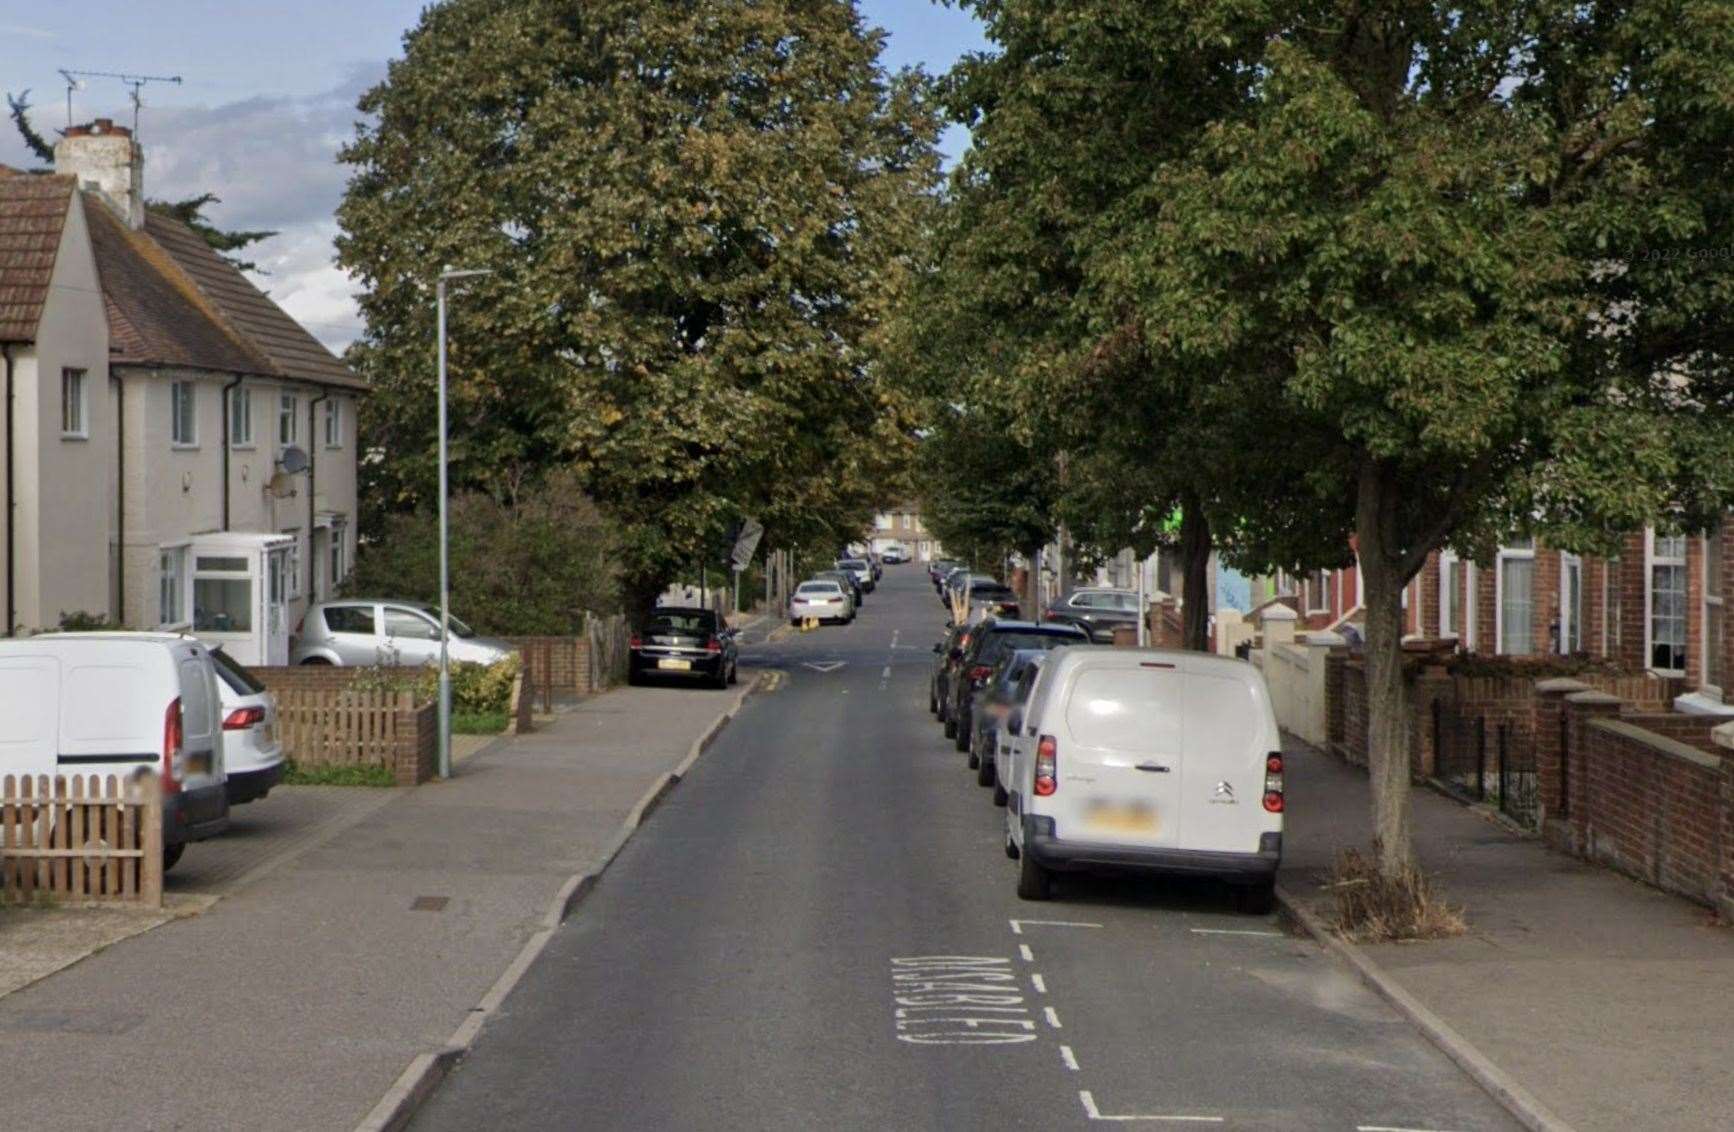 Police vehicles and ambulances were called to Toronto Road, Gillingham, this afternoon. Picture: Google Maps